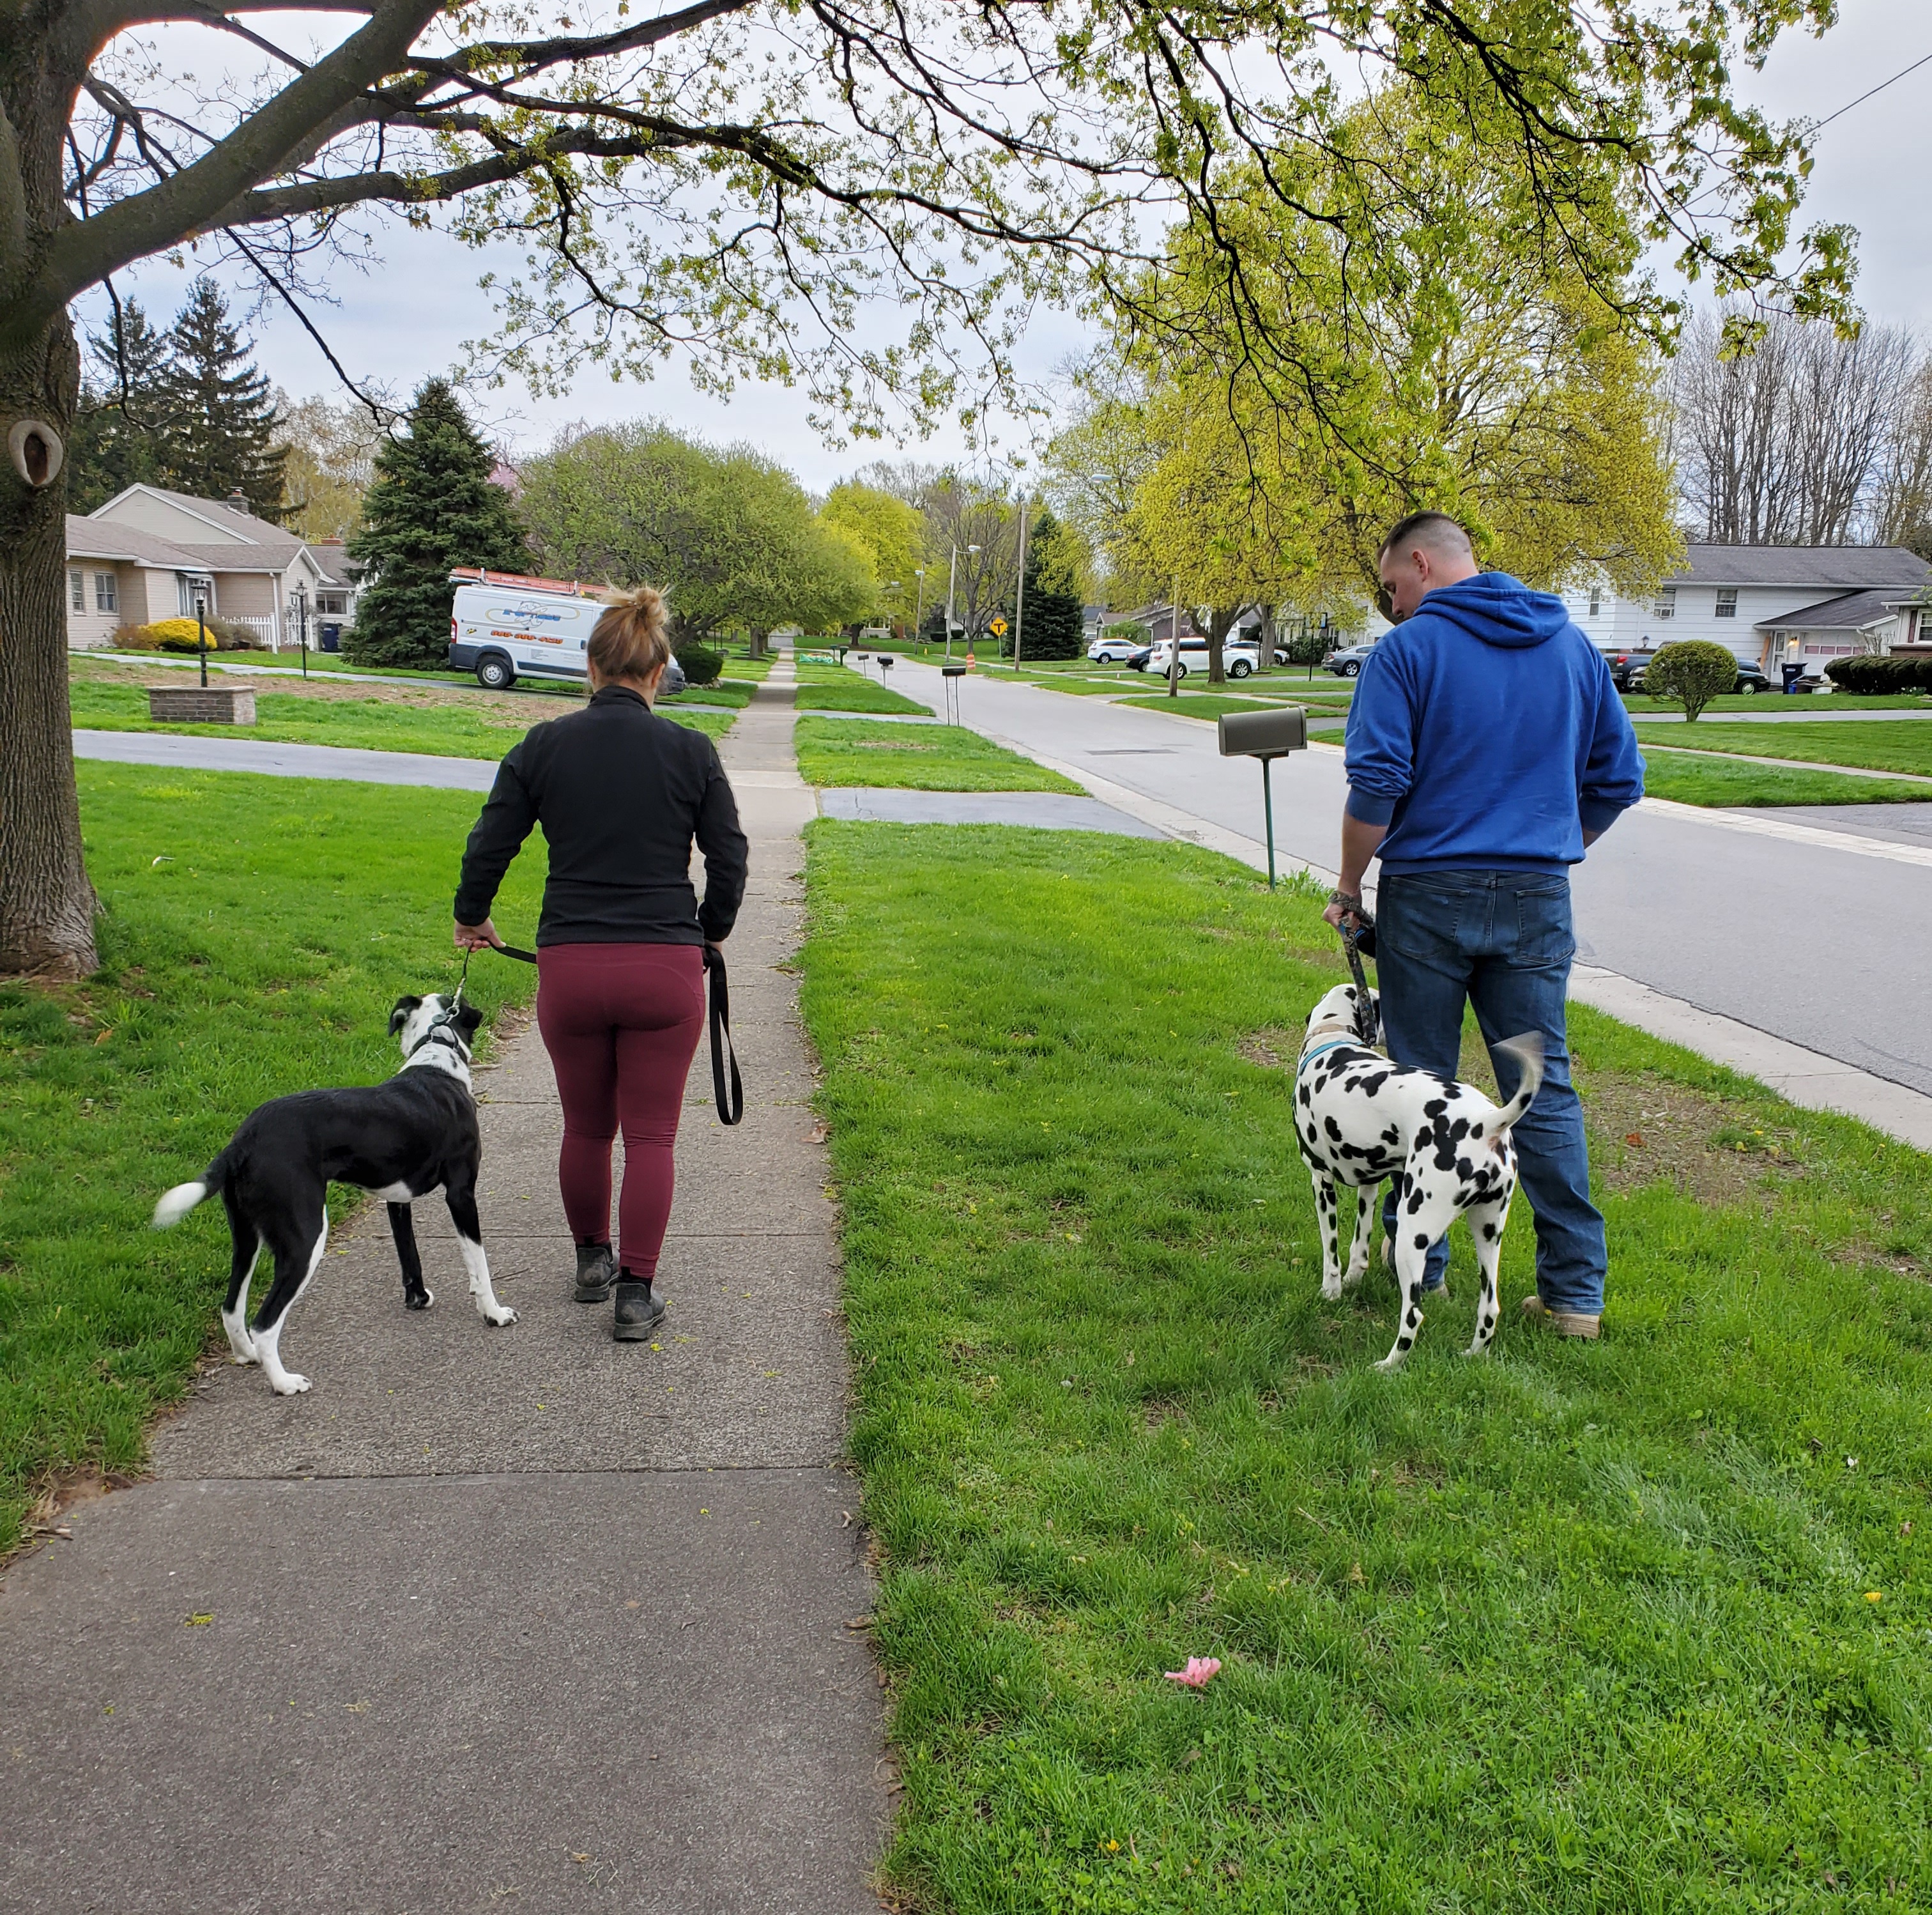 Introducing your foster dog: Closer parallel walk